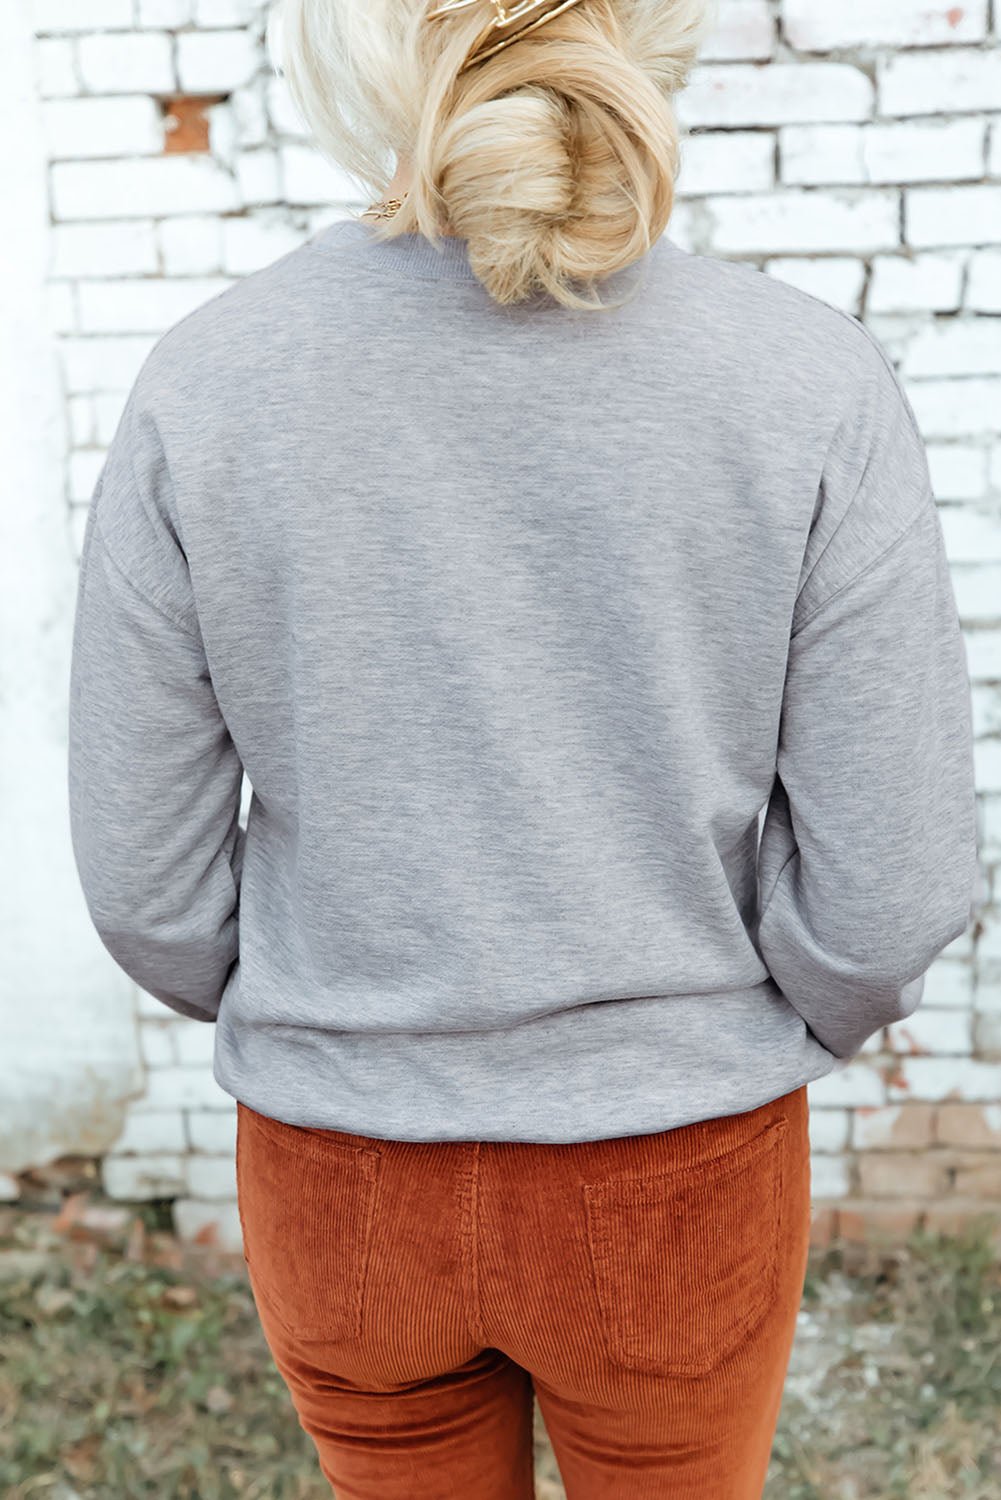 "Lucky in Love" - Embrace the Romance of Autumn with our Luxurious Dropped Shoulder Sweatshirt - Wrap Yourself in Ultimate Comfort and Sophistication - Guy Christopher